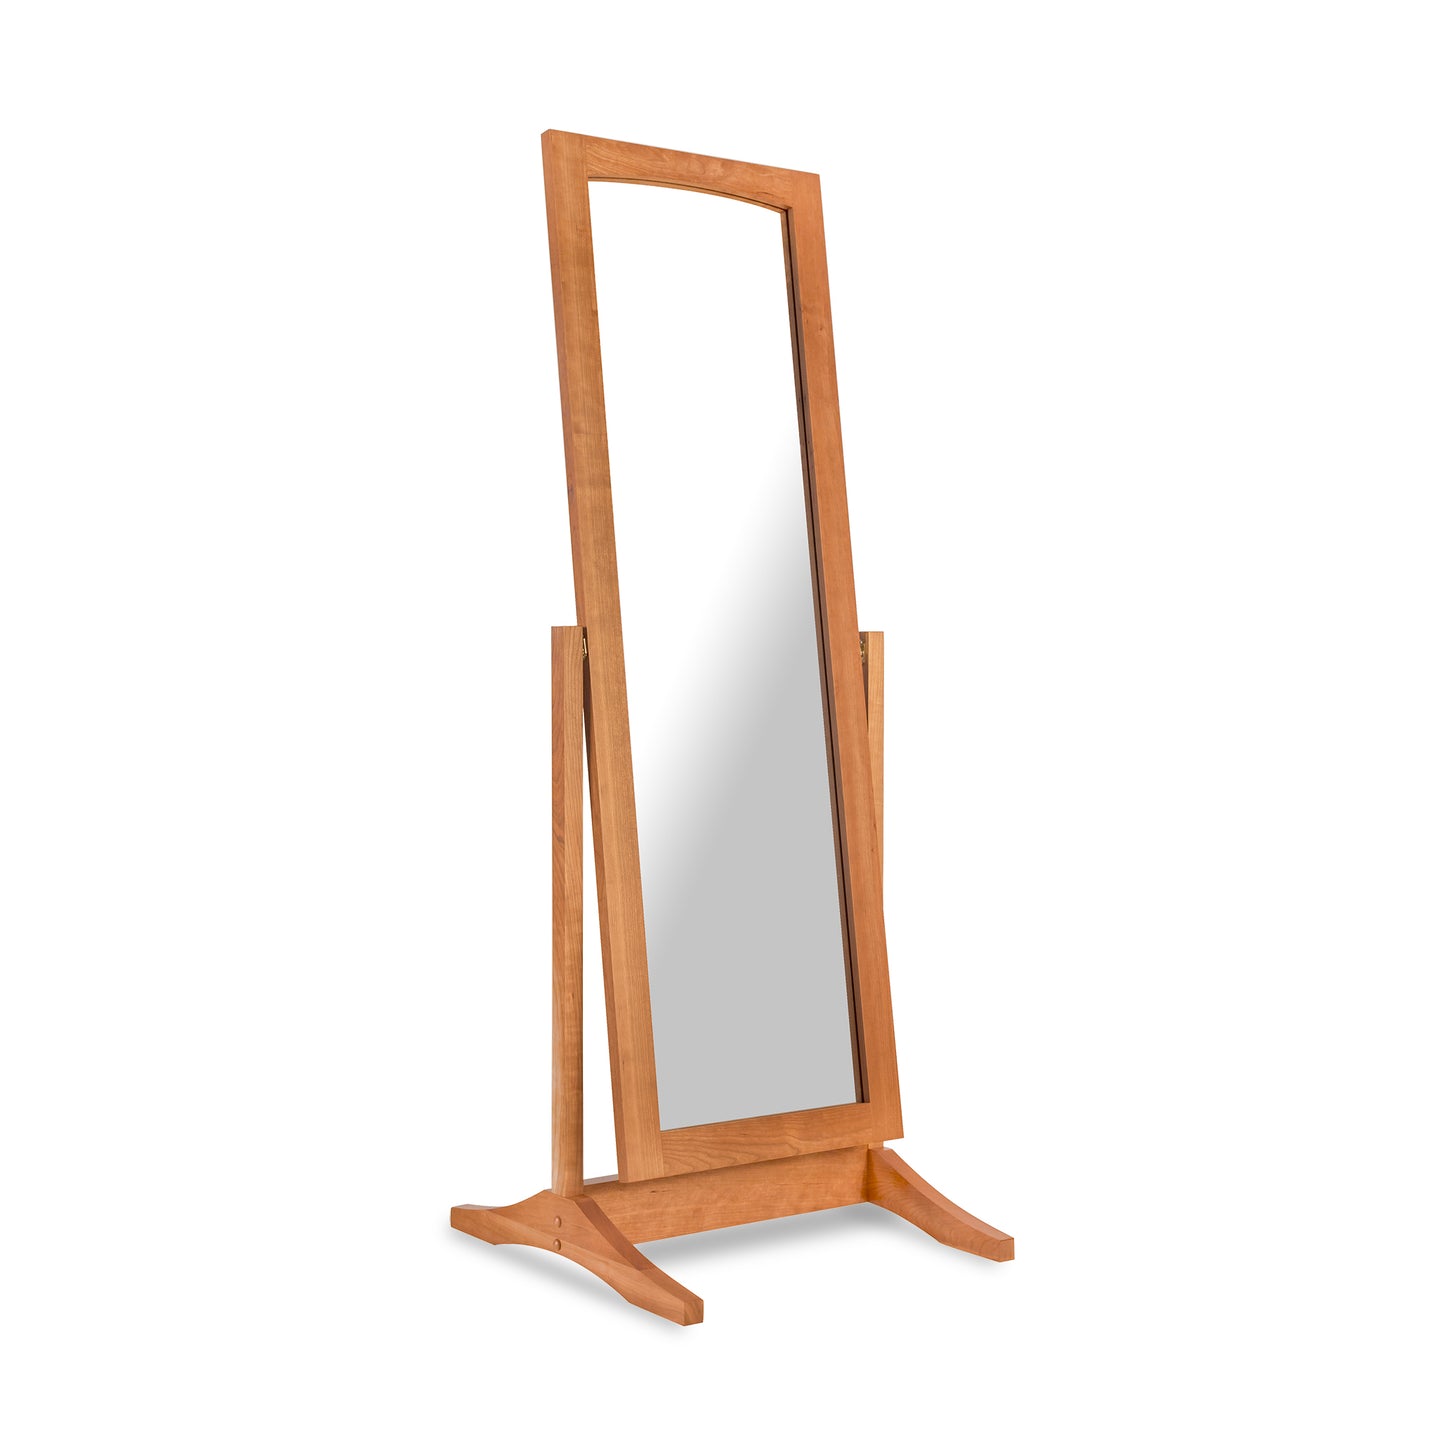 A New England Shaker Floor Mirror from the Lyndon Furniture Collection, showcased on a white background.